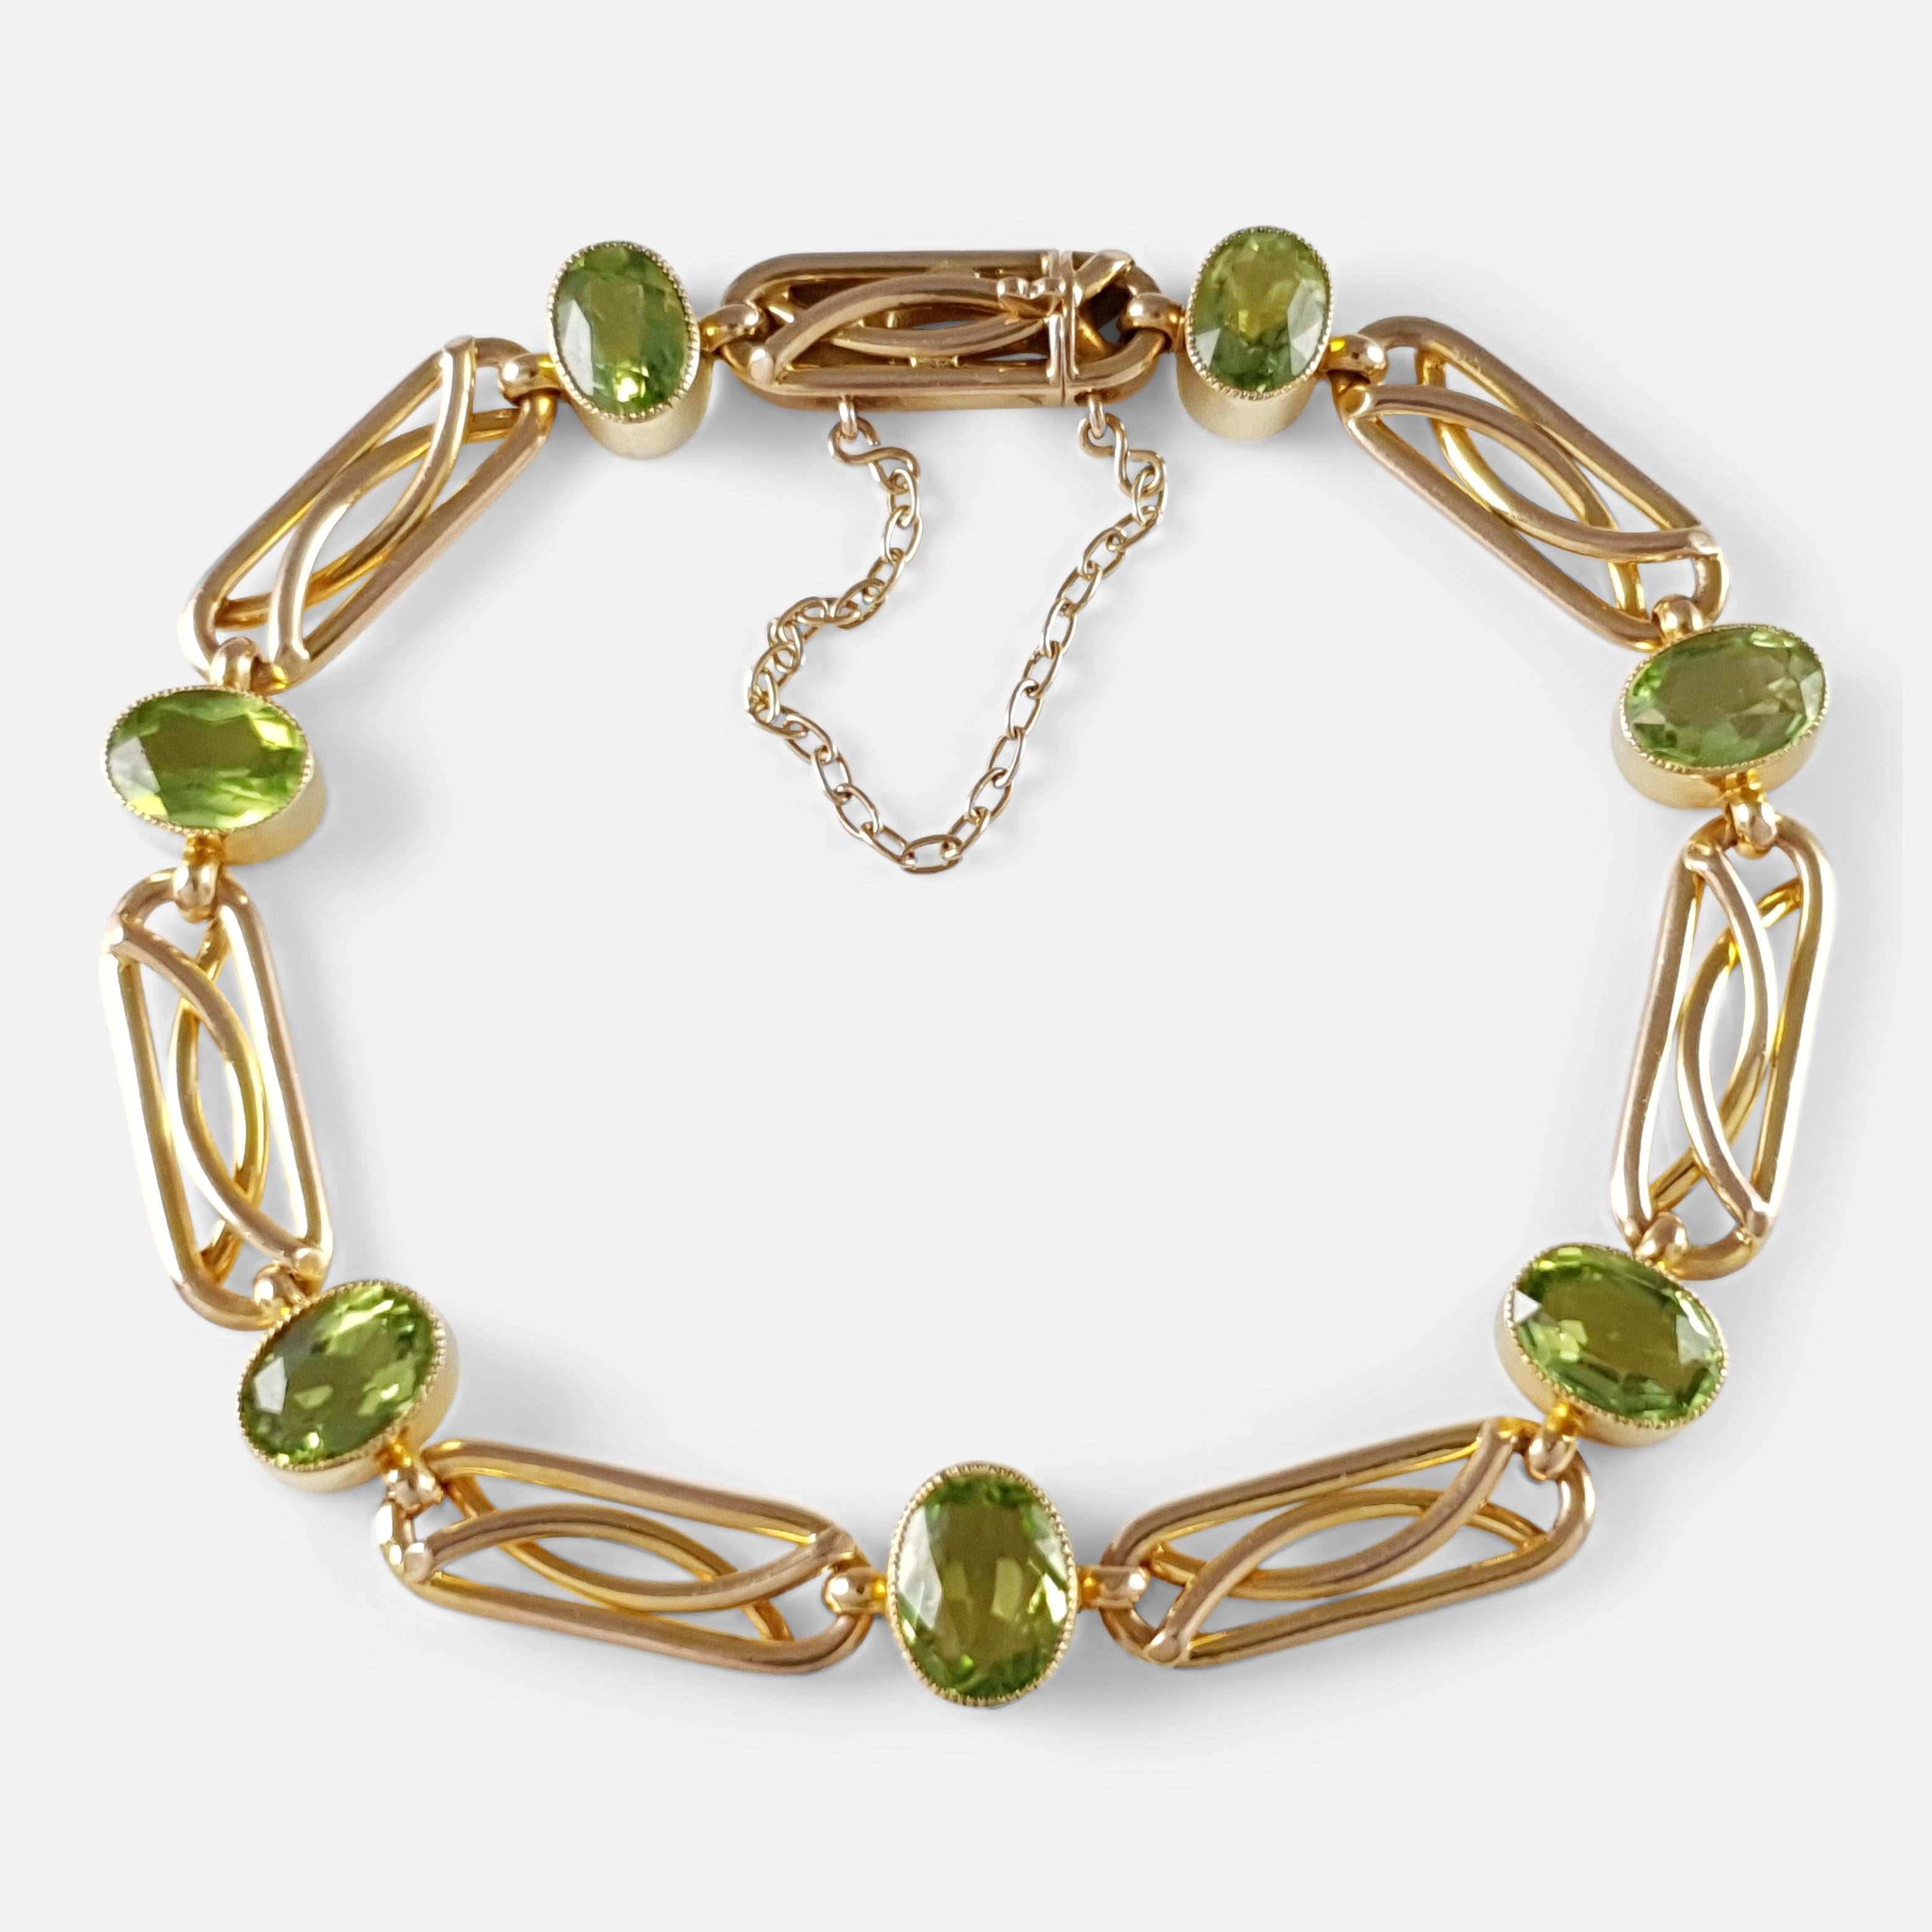 Description: - This is a stunning antique Edwardian 15 karat yellow gold peridot link bracelet circa 1905. The clasp is stamped '15ct' to denote 15 karat (carat) gold.

Measurement: - The bracelet has a internal circumference of  approximately 19cm